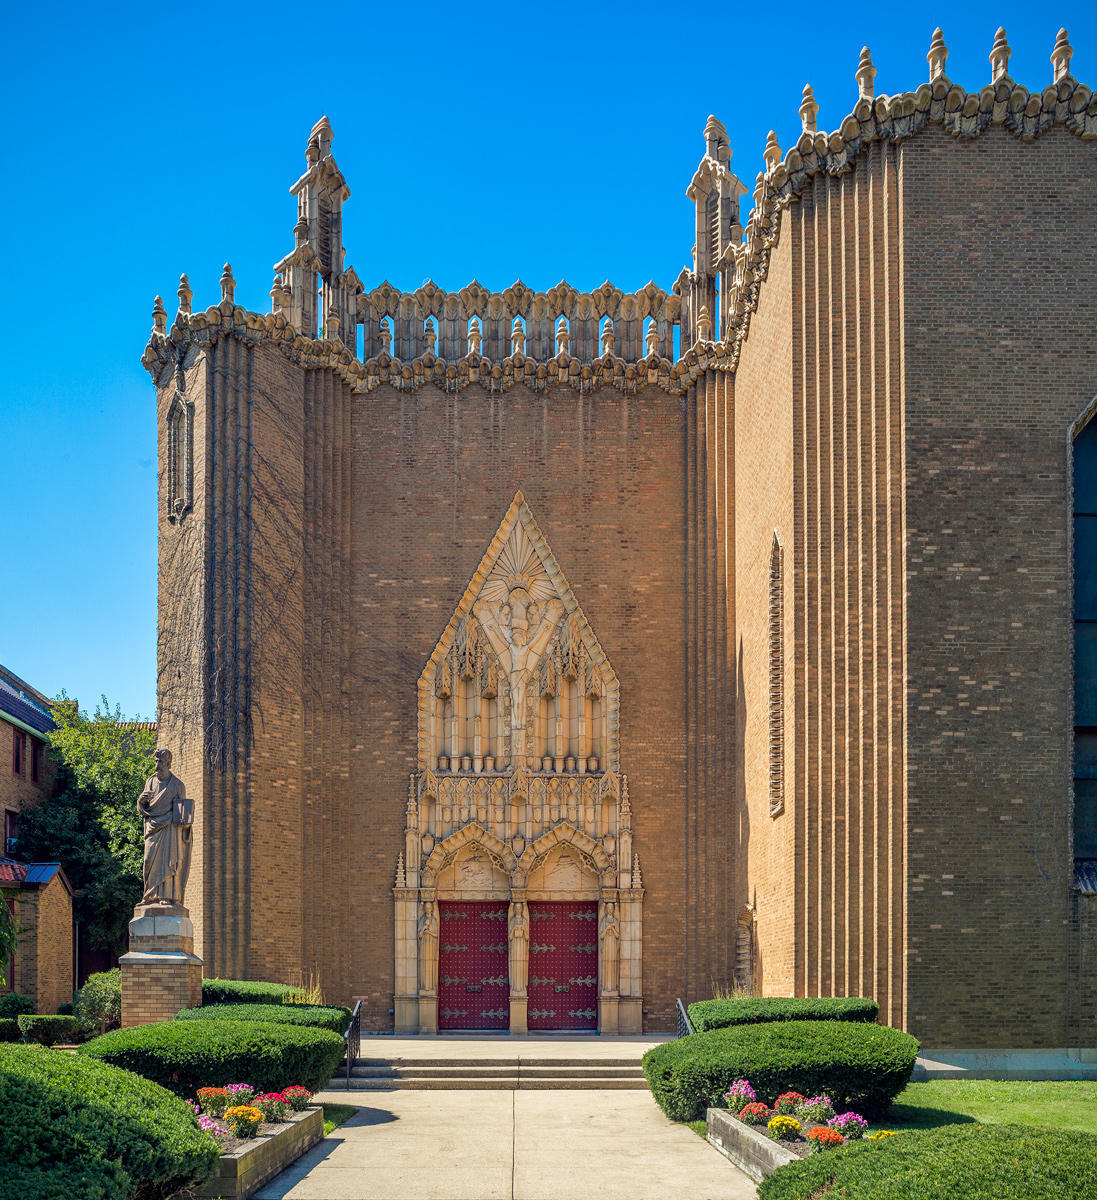 St. Thomas the Apostle Catholic Church - 1919 - Barry Byrne - Hyde Park in Chicago